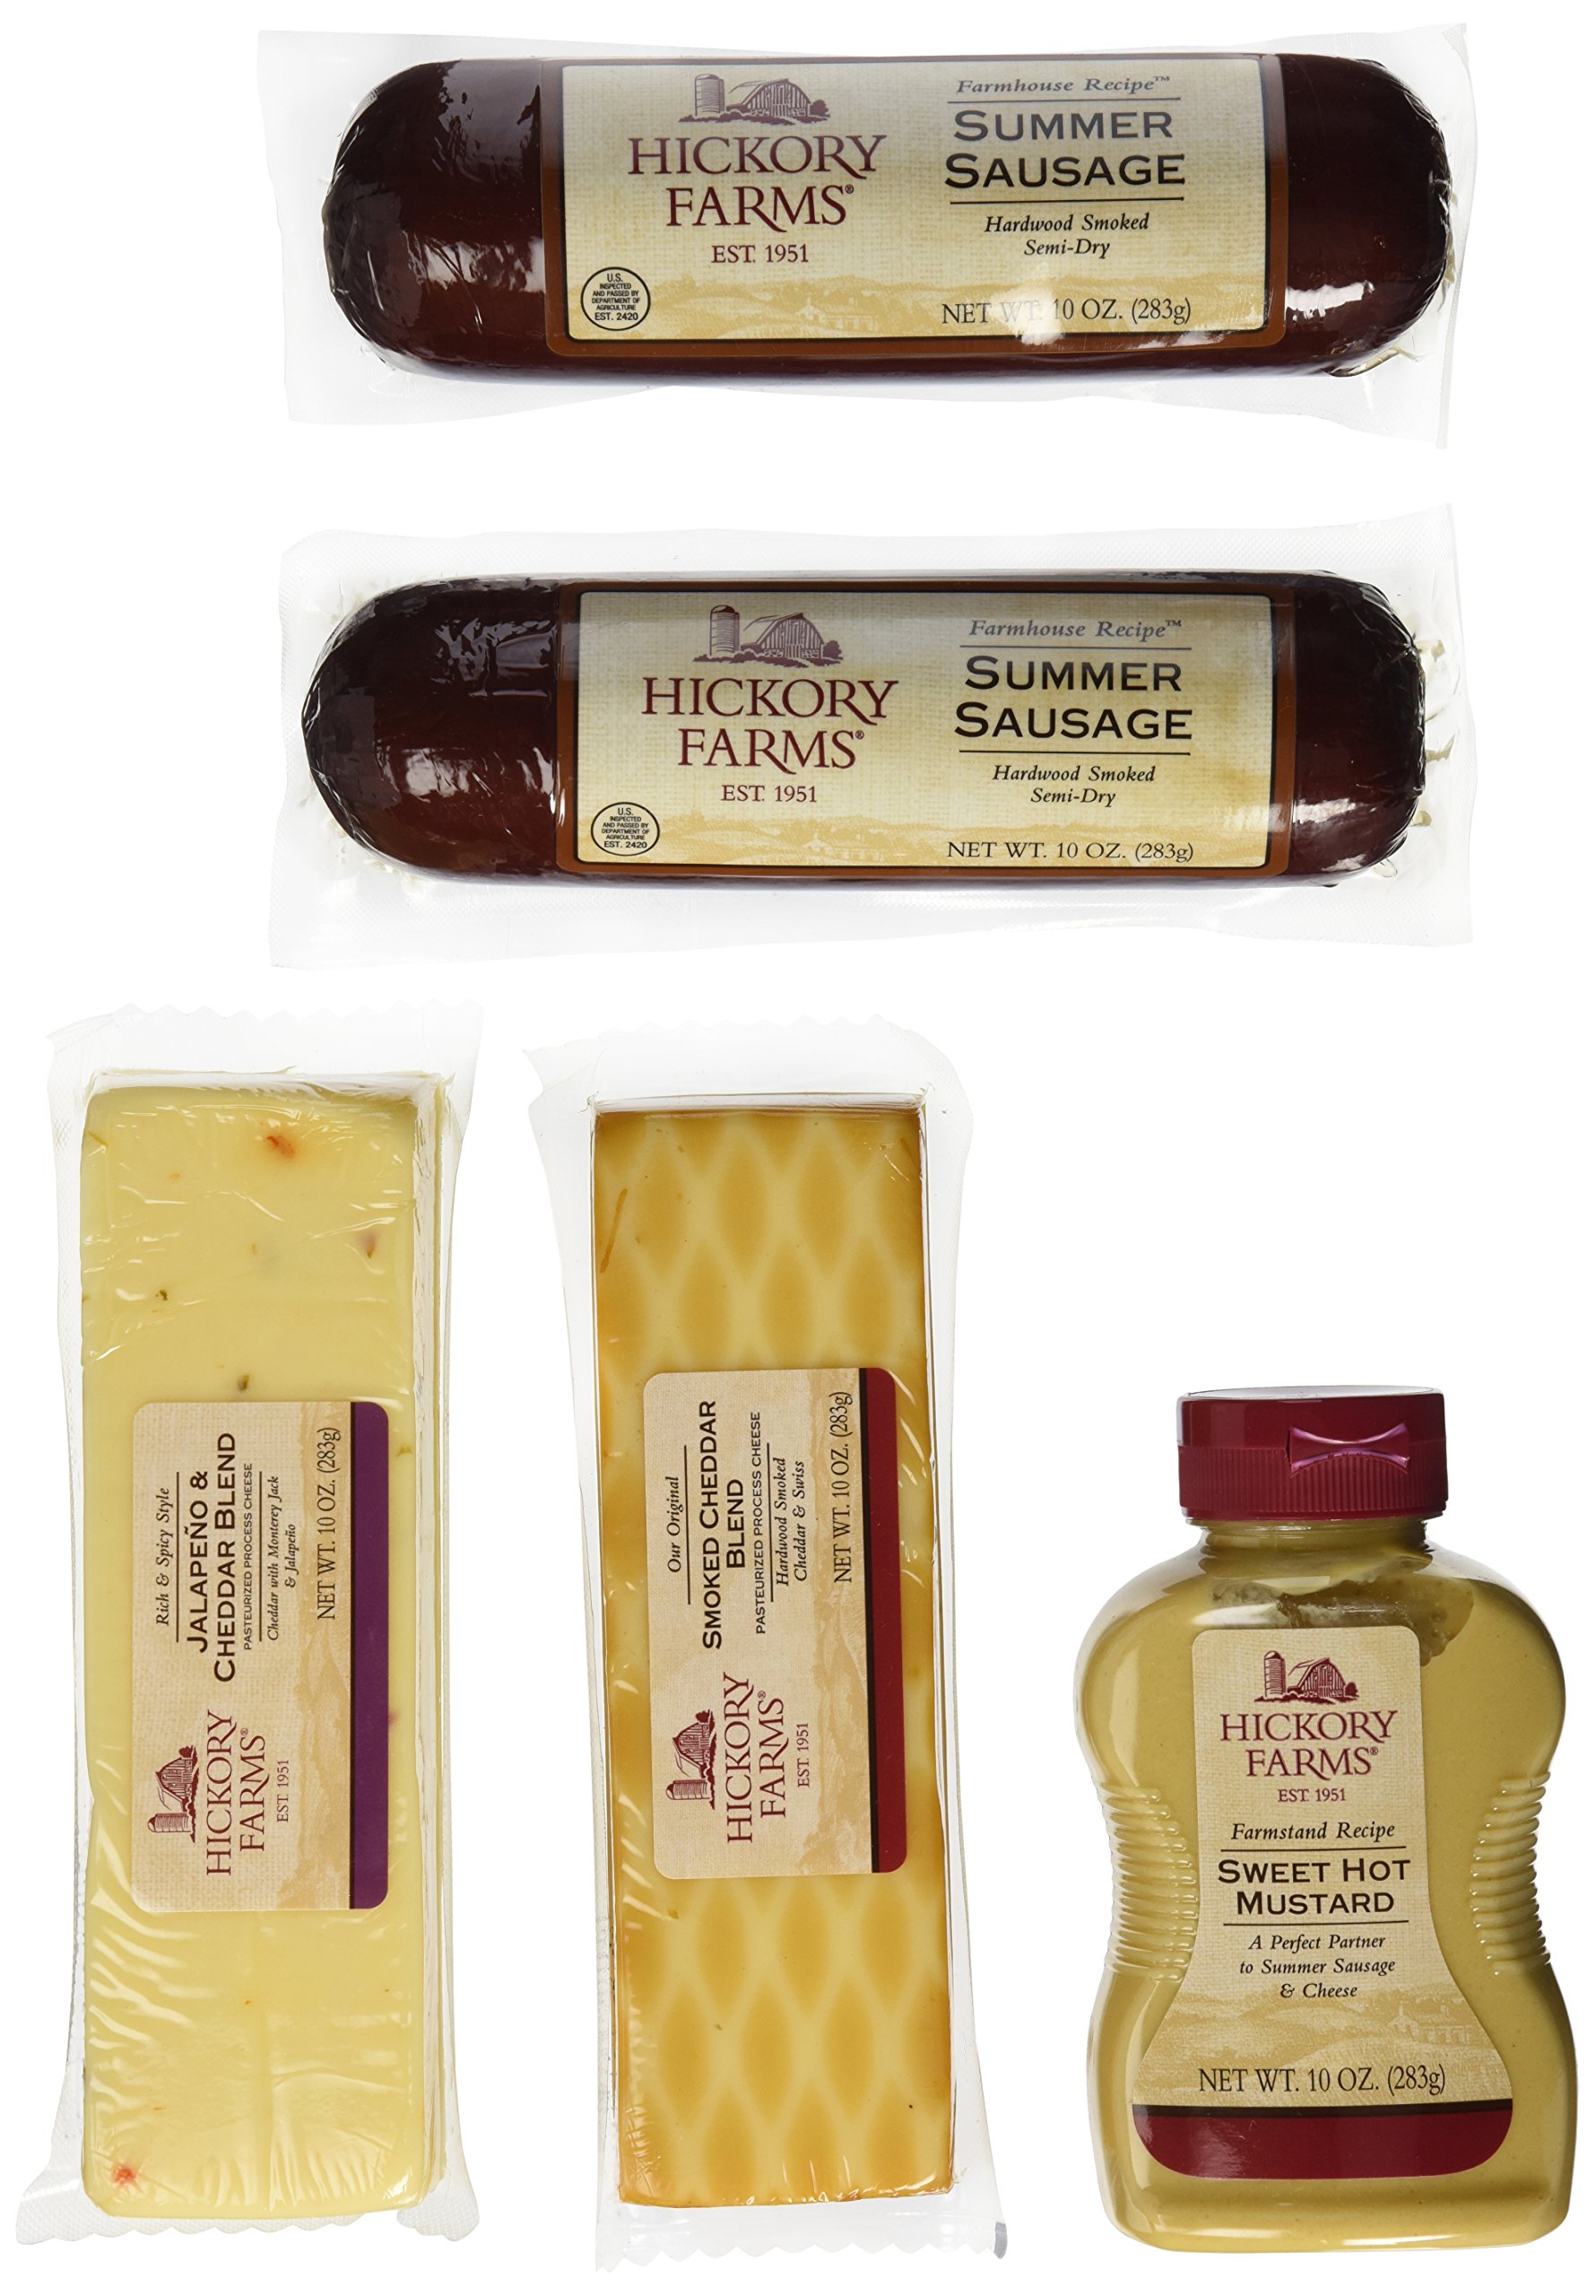 Hickory Farms Smoked Sausage and Cheese Bundle of 5 Items, Summer